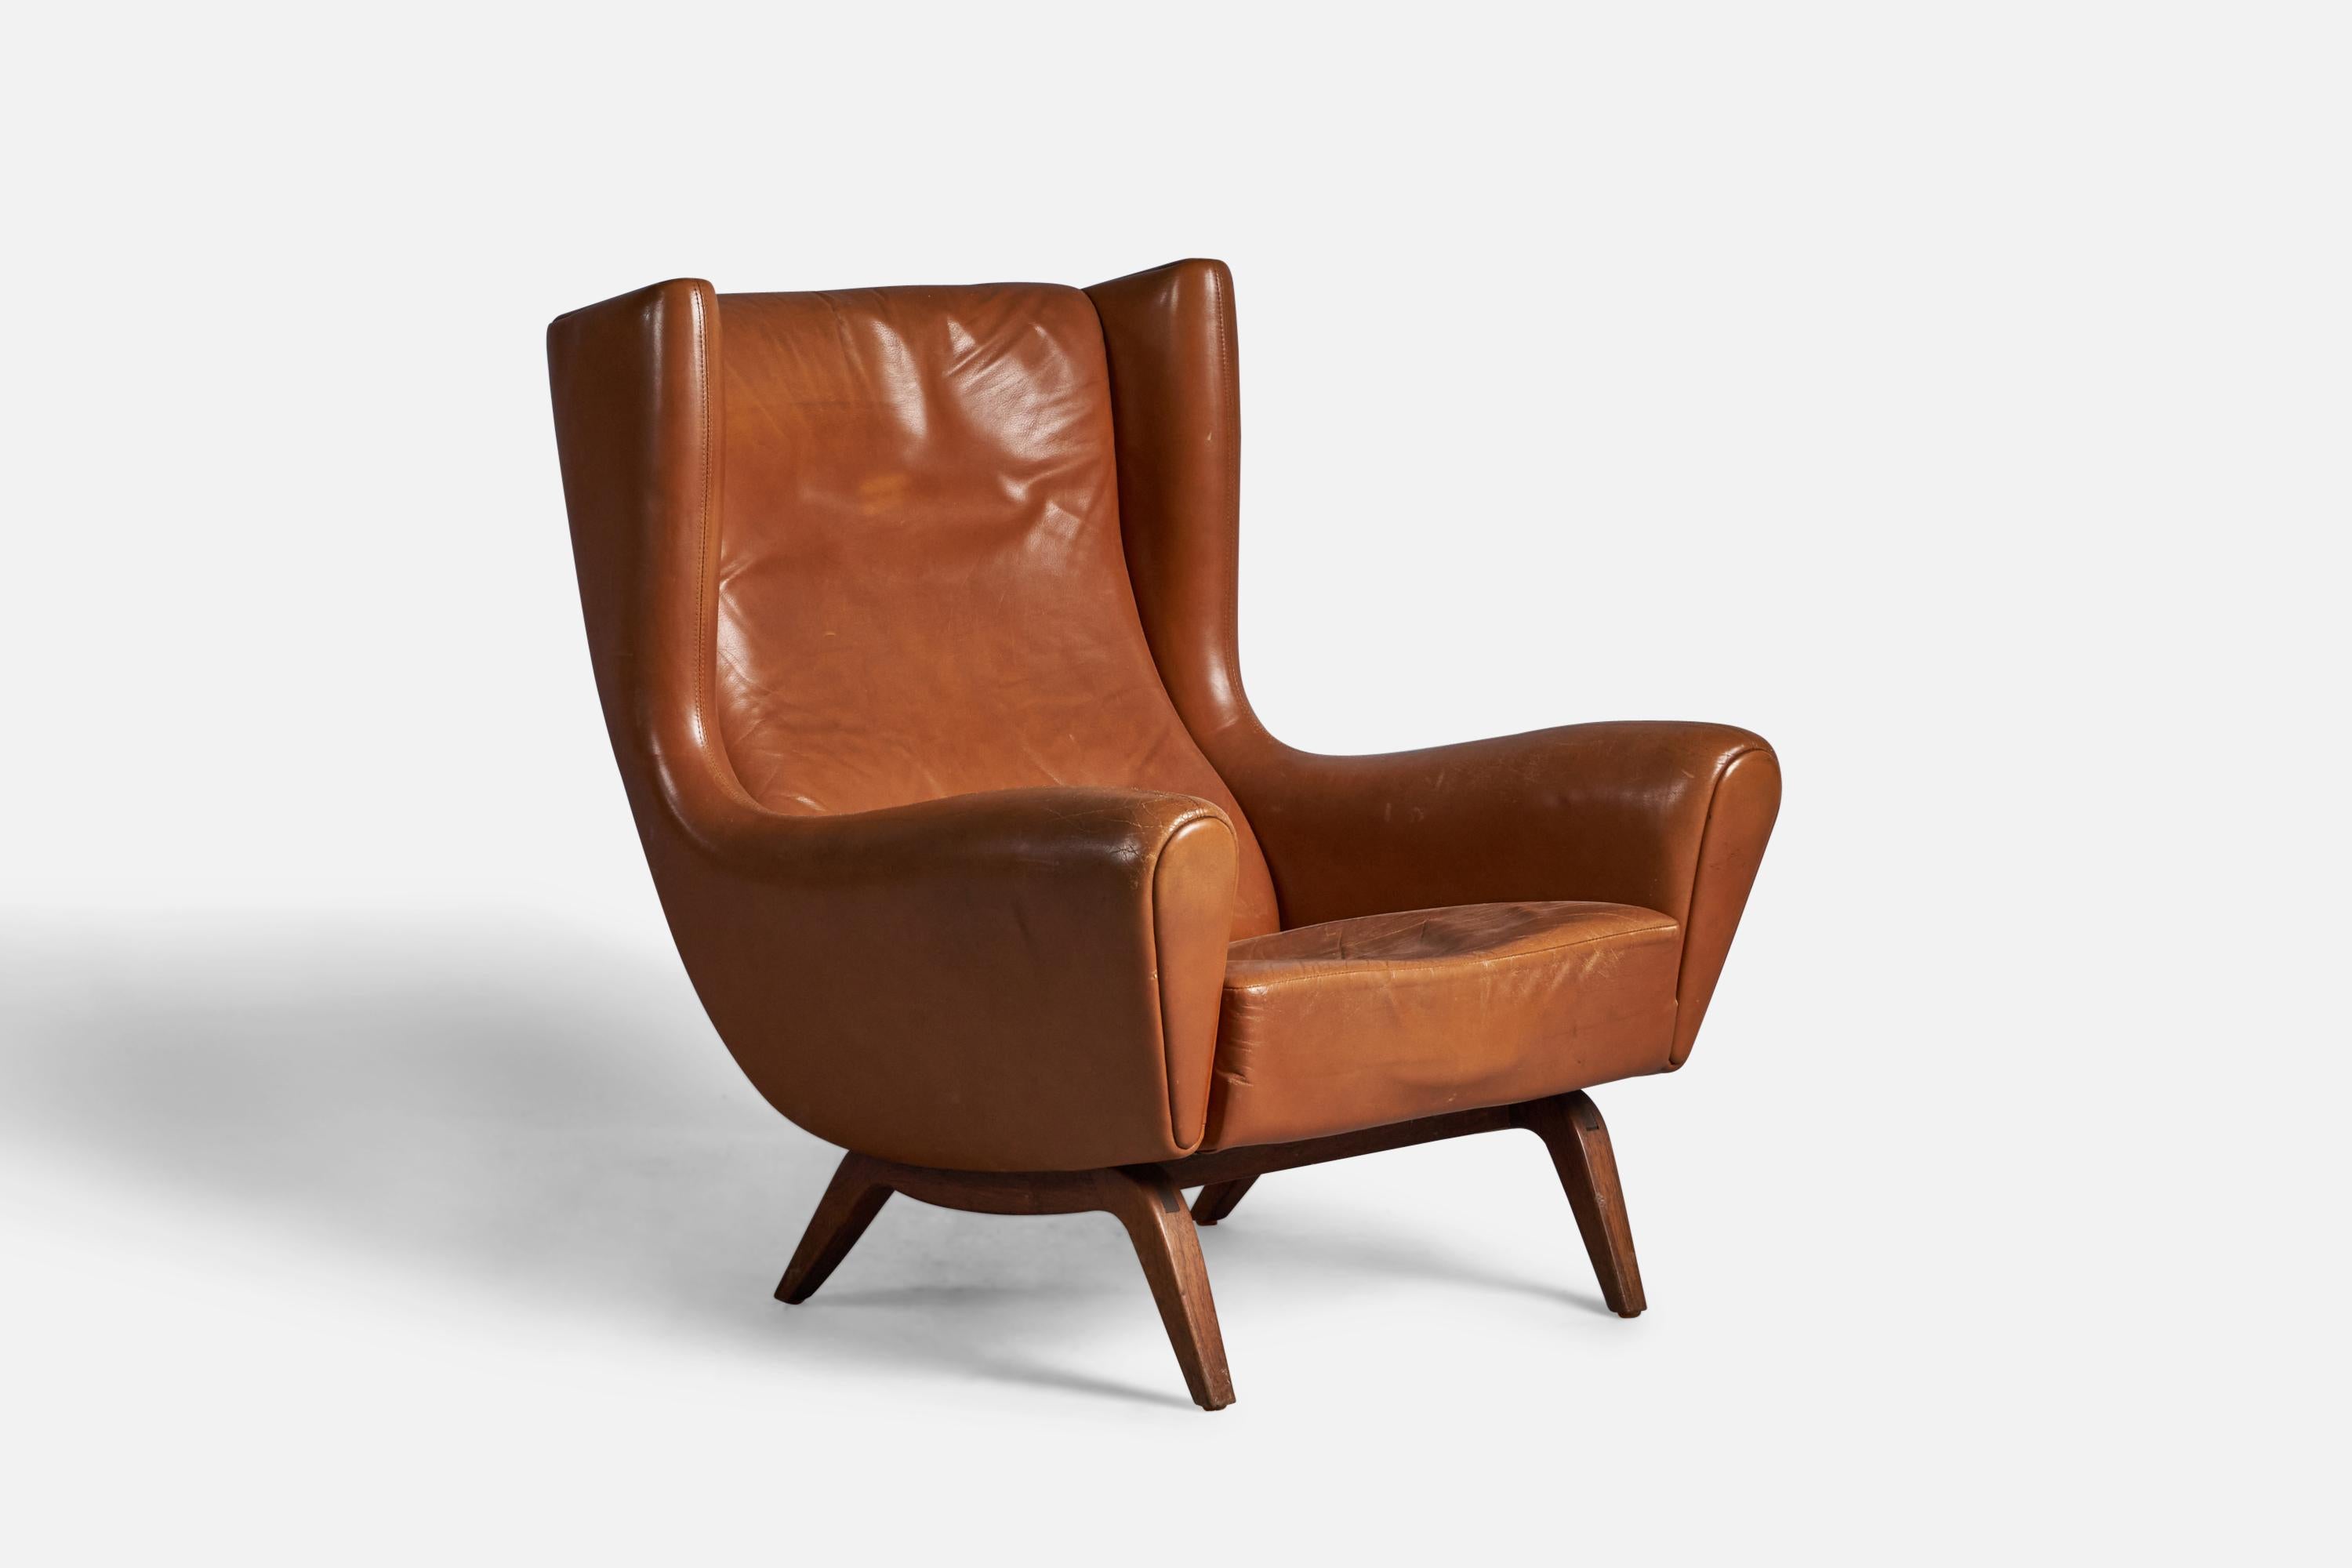 A leather and rosewood lounge chair designed by Illum Wikkelsø and produced by Søren Willadsen, Vejen, Denmark, 1960s.

14.5